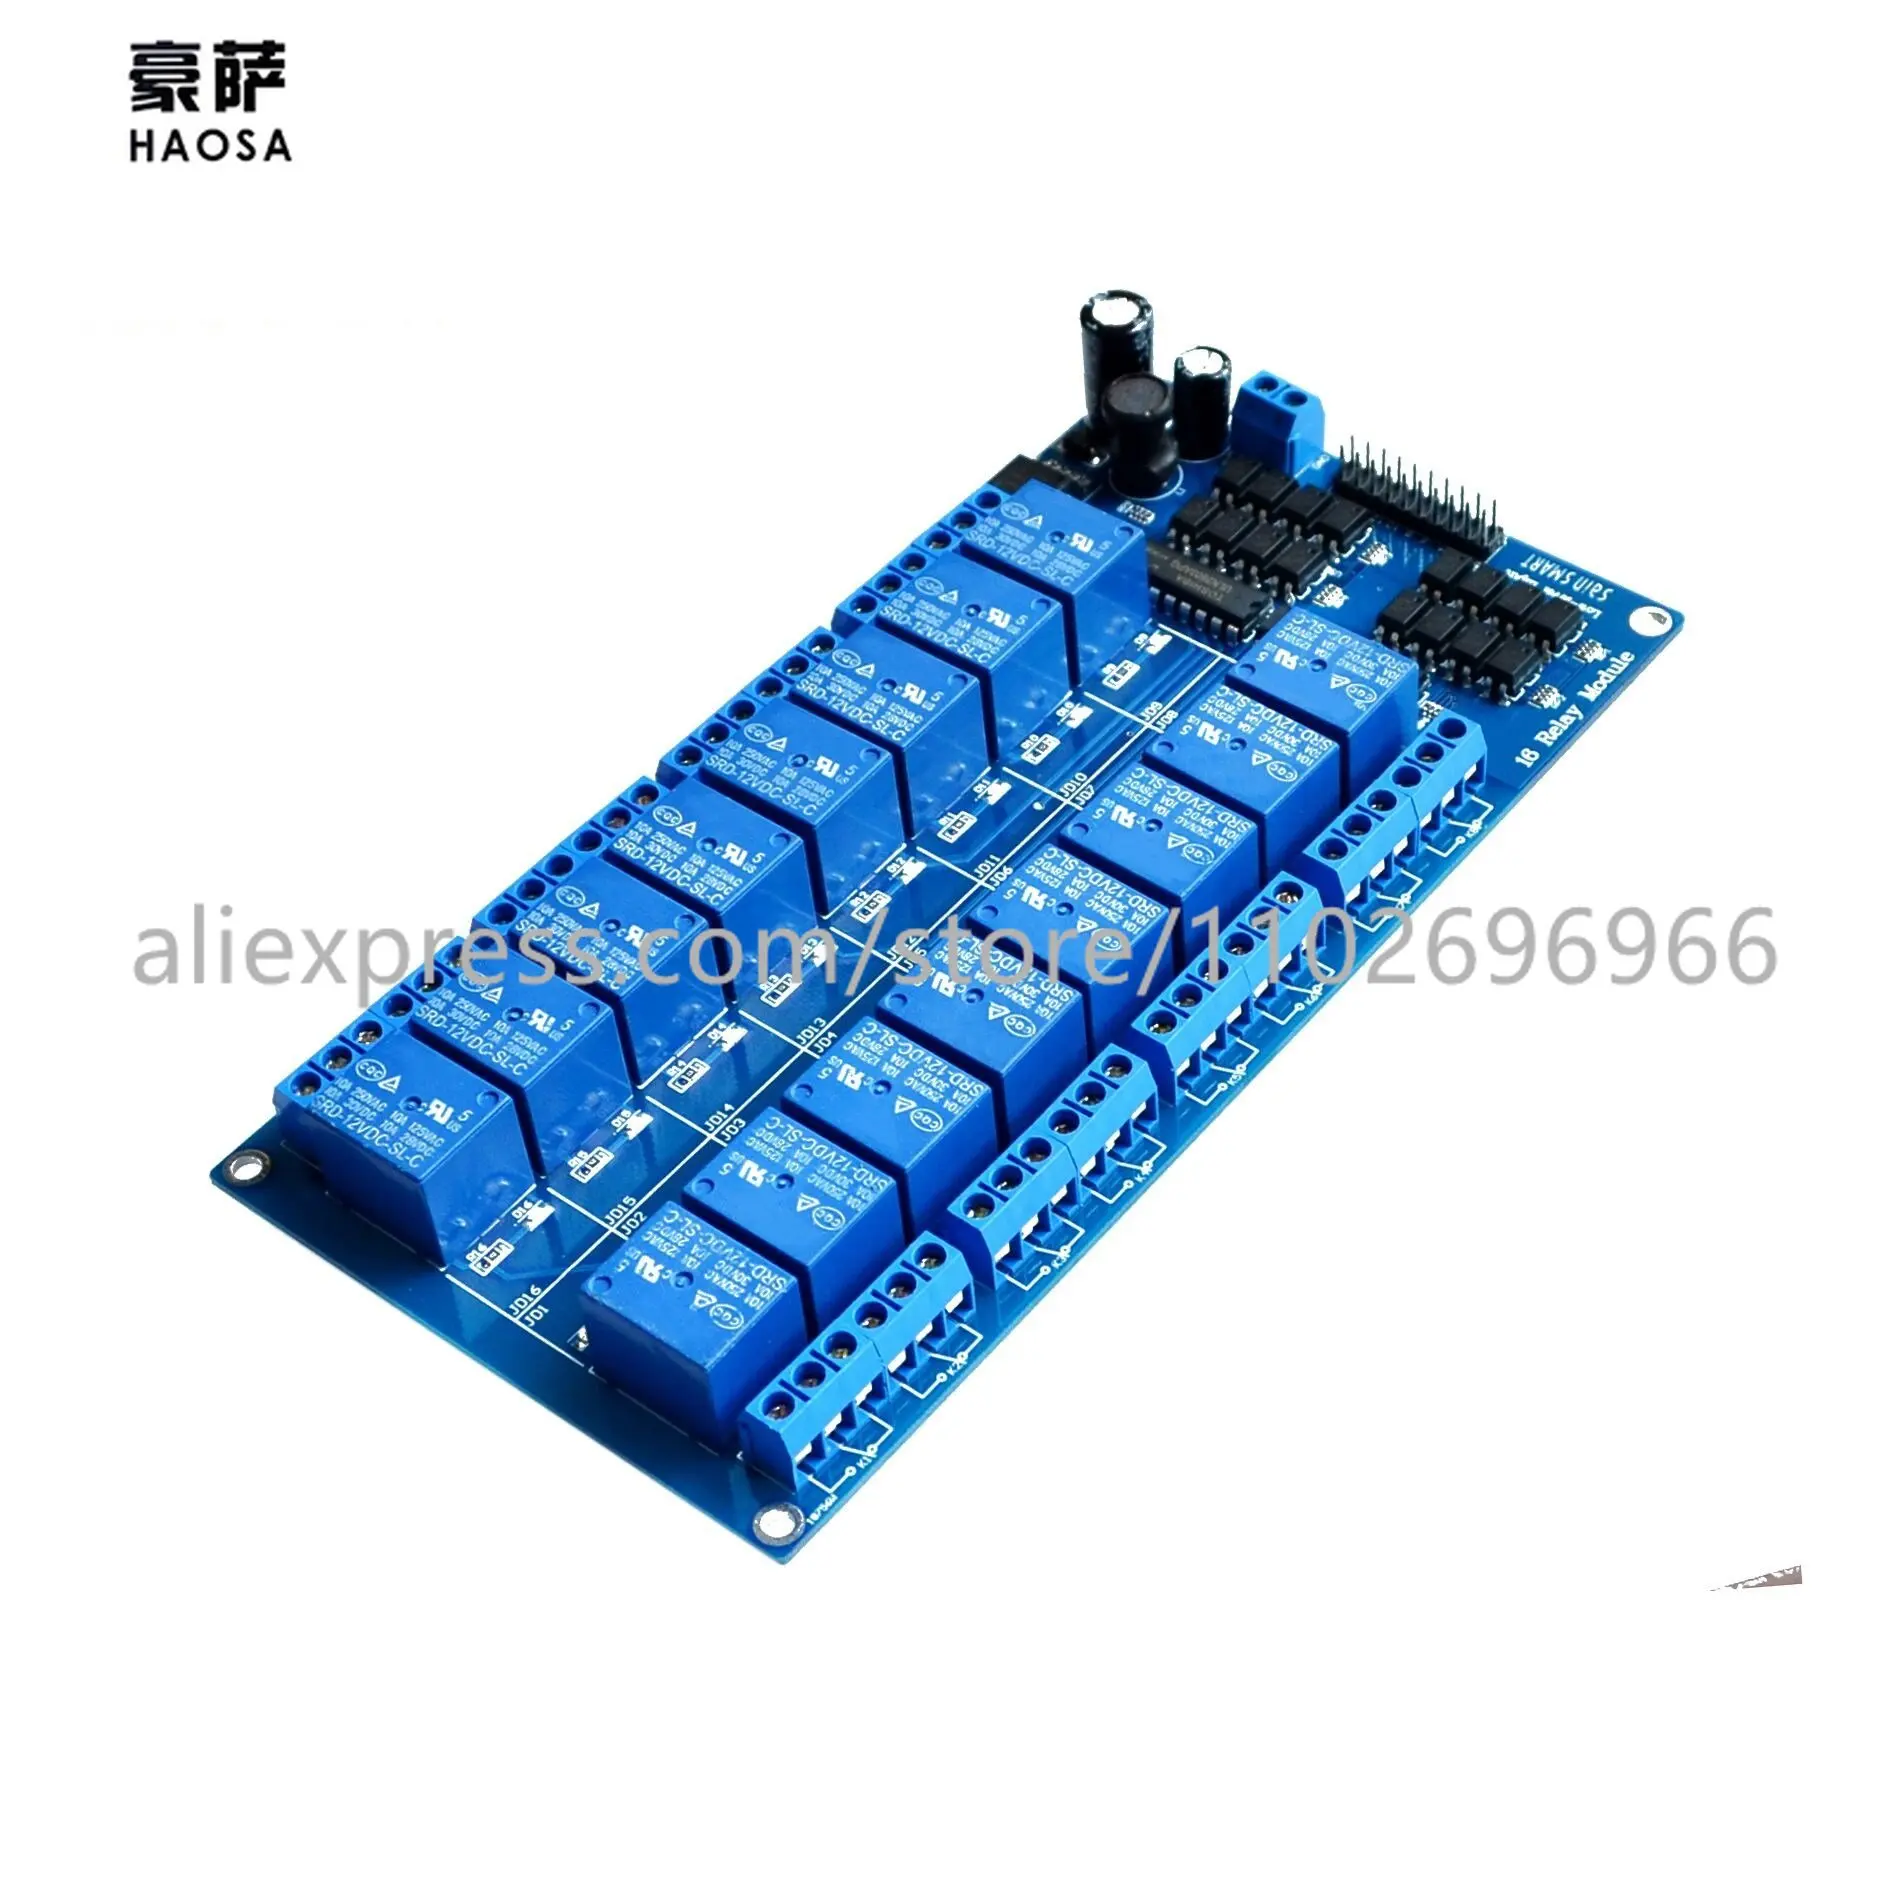 

12V 5V 16 Channel Relay Module Interface Board For Arduino PIC ARM DSP PLC With Optocoupler Protection LM2576 Power